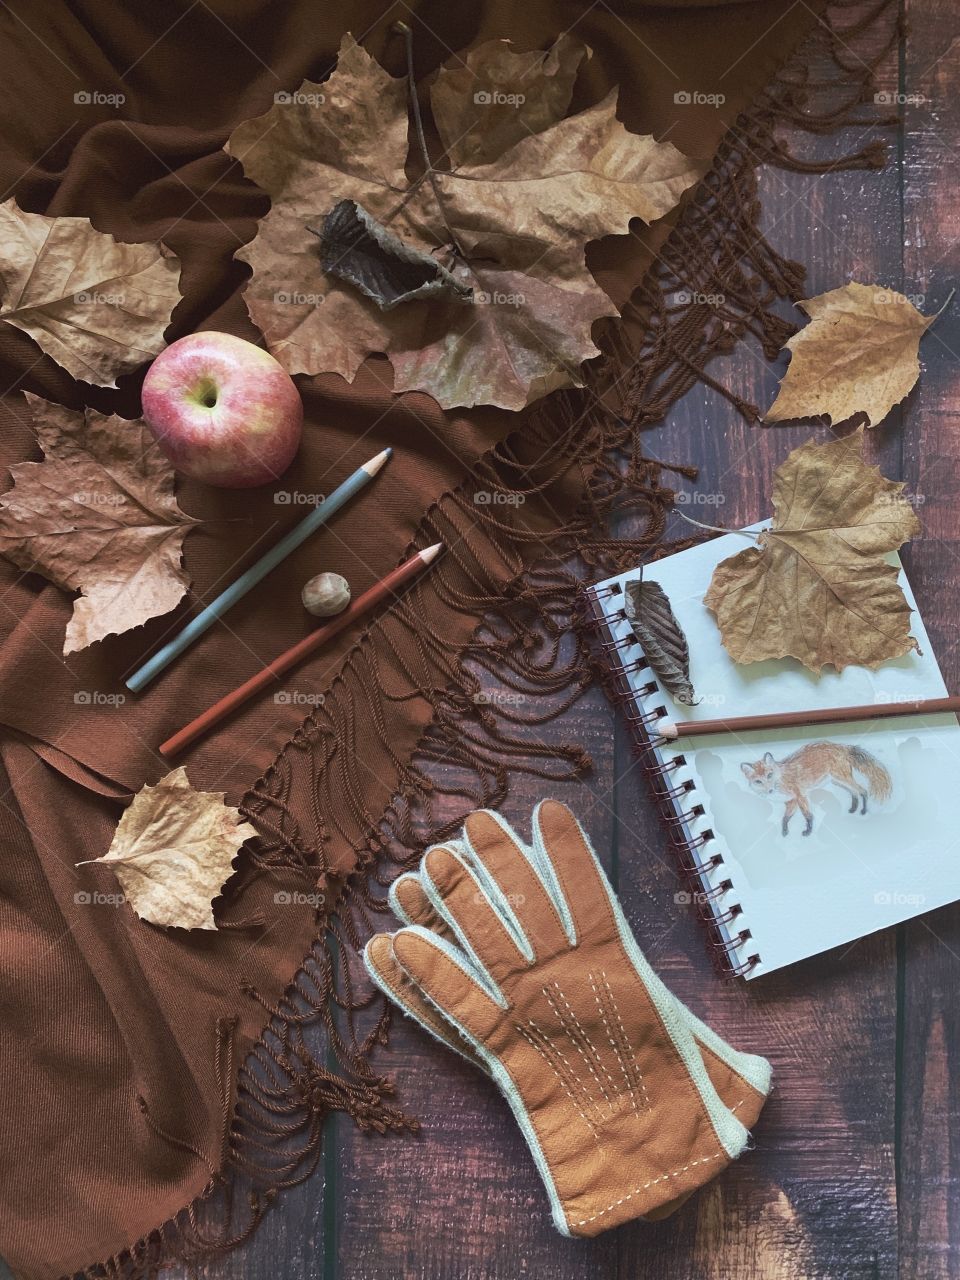 Autumn flat lay of cinnamon-colored, fringed pashmina, suede gloves, sketch of a fox in a spiral bound sketch book, colored pencils, dry leaves, and a red apple on wooden surface